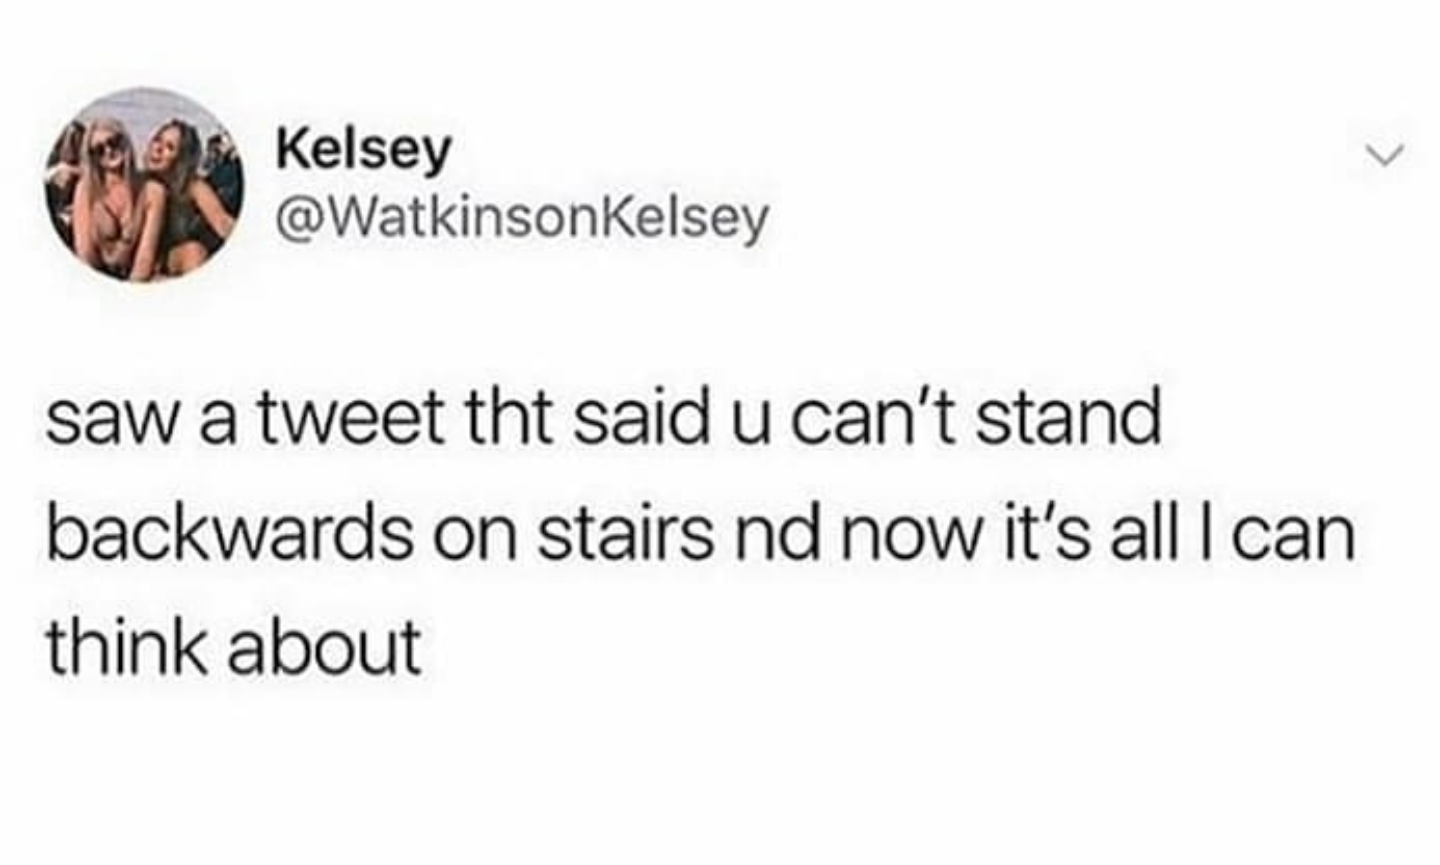 saw a tweet that said u can t stand backwards on stairs - Kelsey saw a tweet tht said u can't stand backwards on stairs nd now it's all I can think about